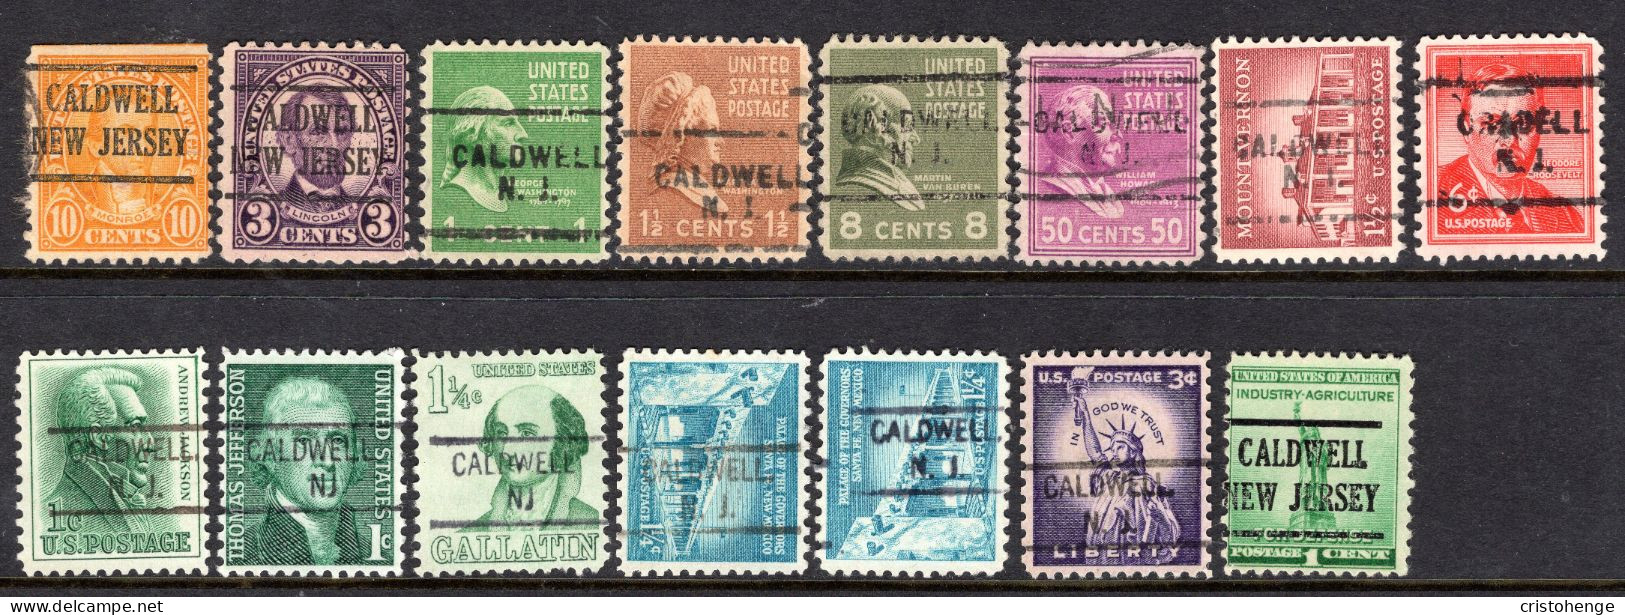 USA Precancel - New Jersey - Caldwell - Small Collection - Voorafgestempeld